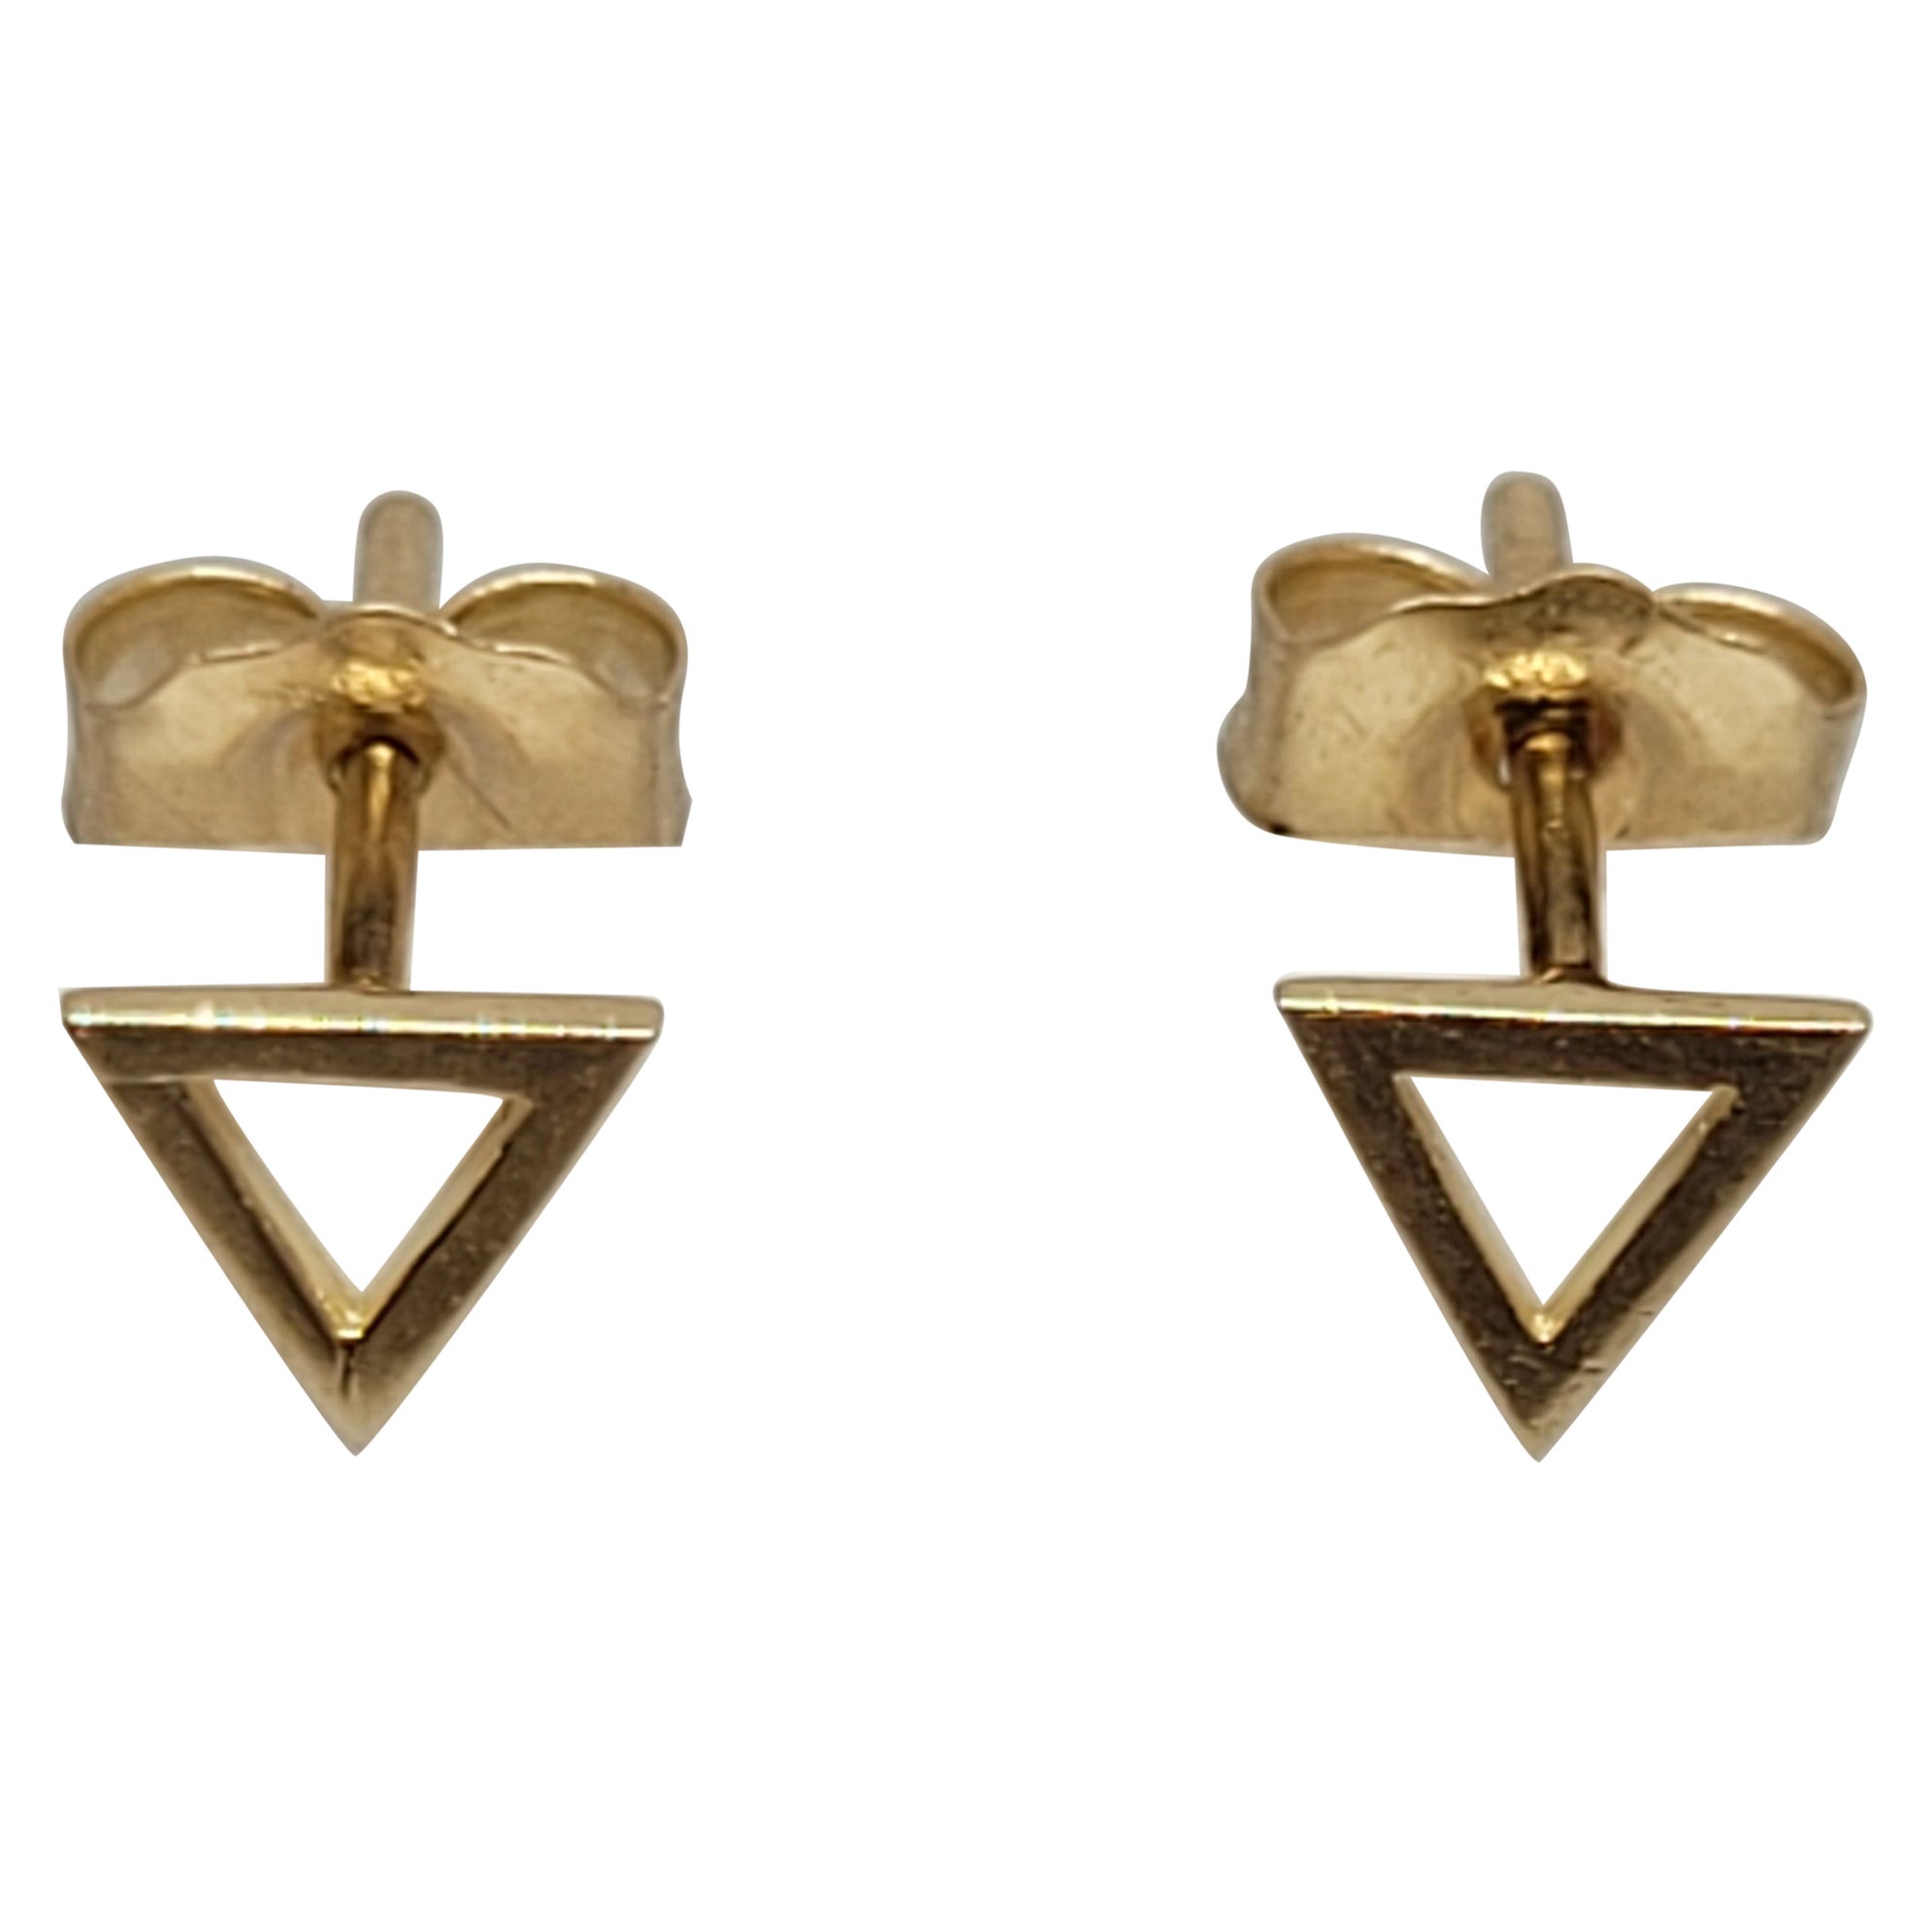 14kt Yellow Gold Triangle Earrings, Friction Posts, Petite, .4 Grams, Stamp 14kt For Sale